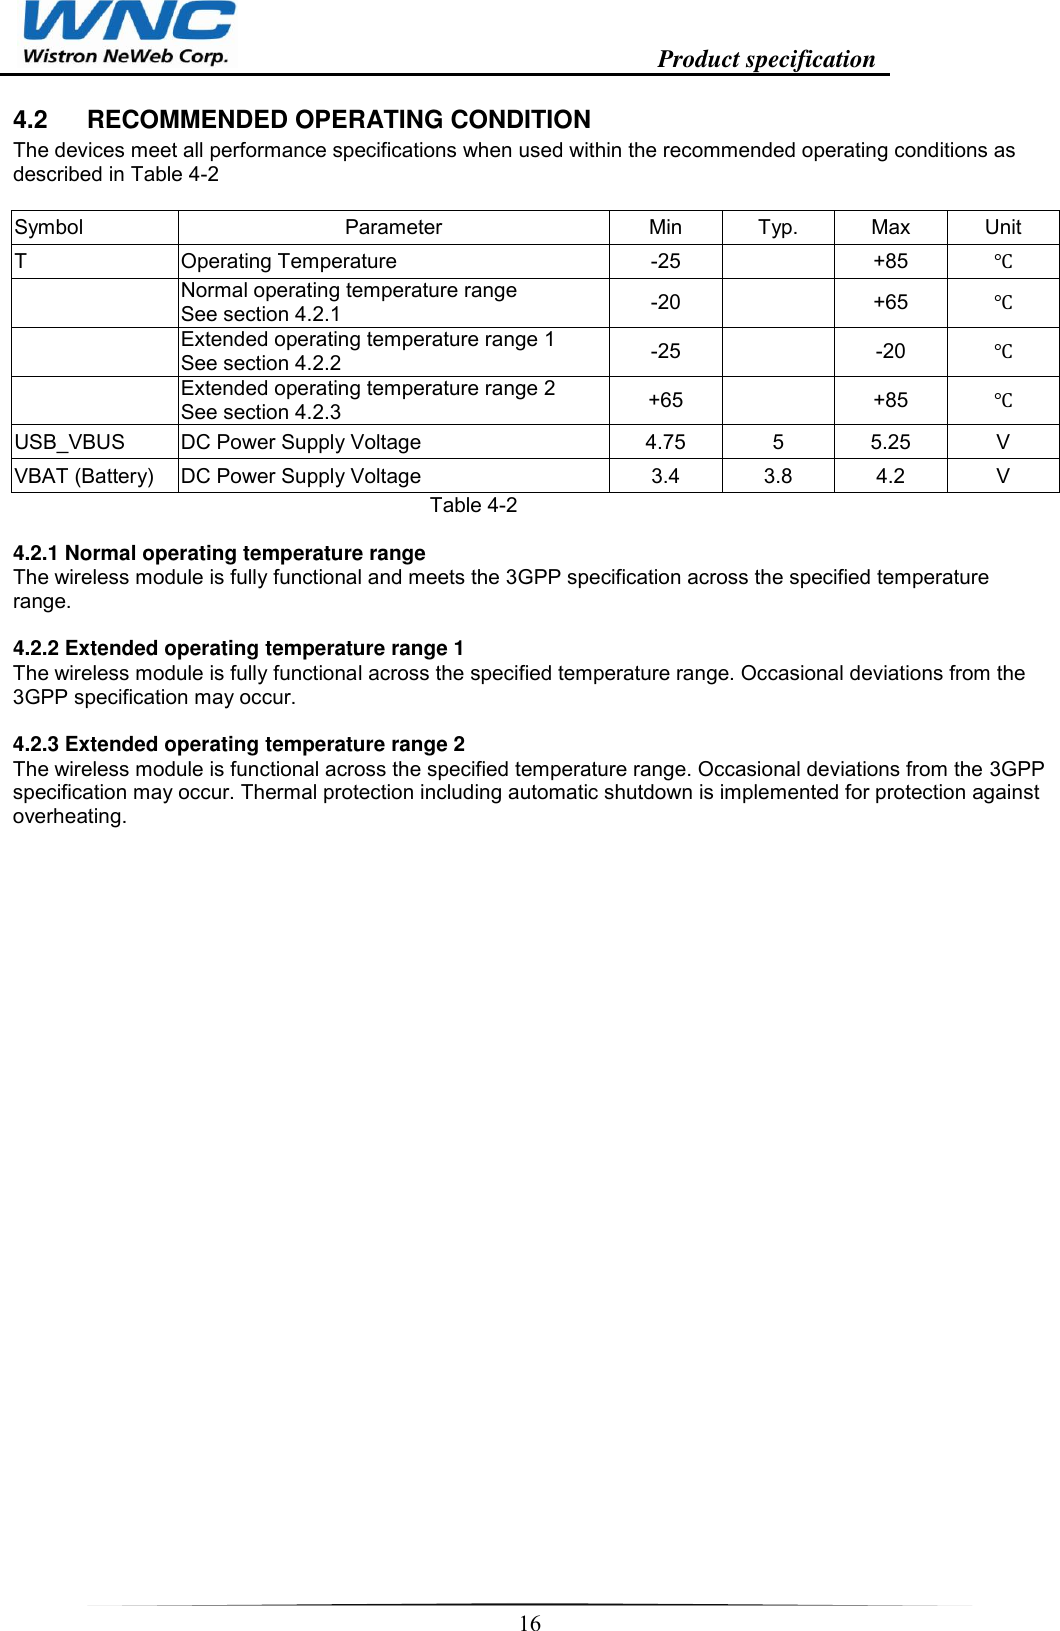                                                                    Product specification    16  4.2  RECOMMENDED OPERATING CONDITION The devices meet all performance specifications when used within the recommended operating conditions as described in Table 4-2  Symbol Parameter Min Typ. Max Unit T Operating Temperature  -25  +85    Normal operating temperature range  See section 4.2.1  -20  +65    Extended operating temperature range 1  See section 4.2.2  -25  -20    Extended operating temperature range 2  See section 4.2.3  +65  +85   USB_VBUS DC Power Supply Voltage 4.75 5 5.25 V VBAT (Battery) DC Power Supply Voltage 3.4 3.8 4.2 V Table 4-2  4.2.1 Normal operating temperature range  The wireless module is fully functional and meets the 3GPP specification across the specified temperature range.   4.2.2 Extended operating temperature range 1  The wireless module is fully functional across the specified temperature range. Occasional deviations from the 3GPP specification may occur.   4.2.3 Extended operating temperature range 2  The wireless module is functional across the specified temperature range. Occasional deviations from the 3GPP specification may occur. Thermal protection including automatic shutdown is implemented for protection against overheating.  